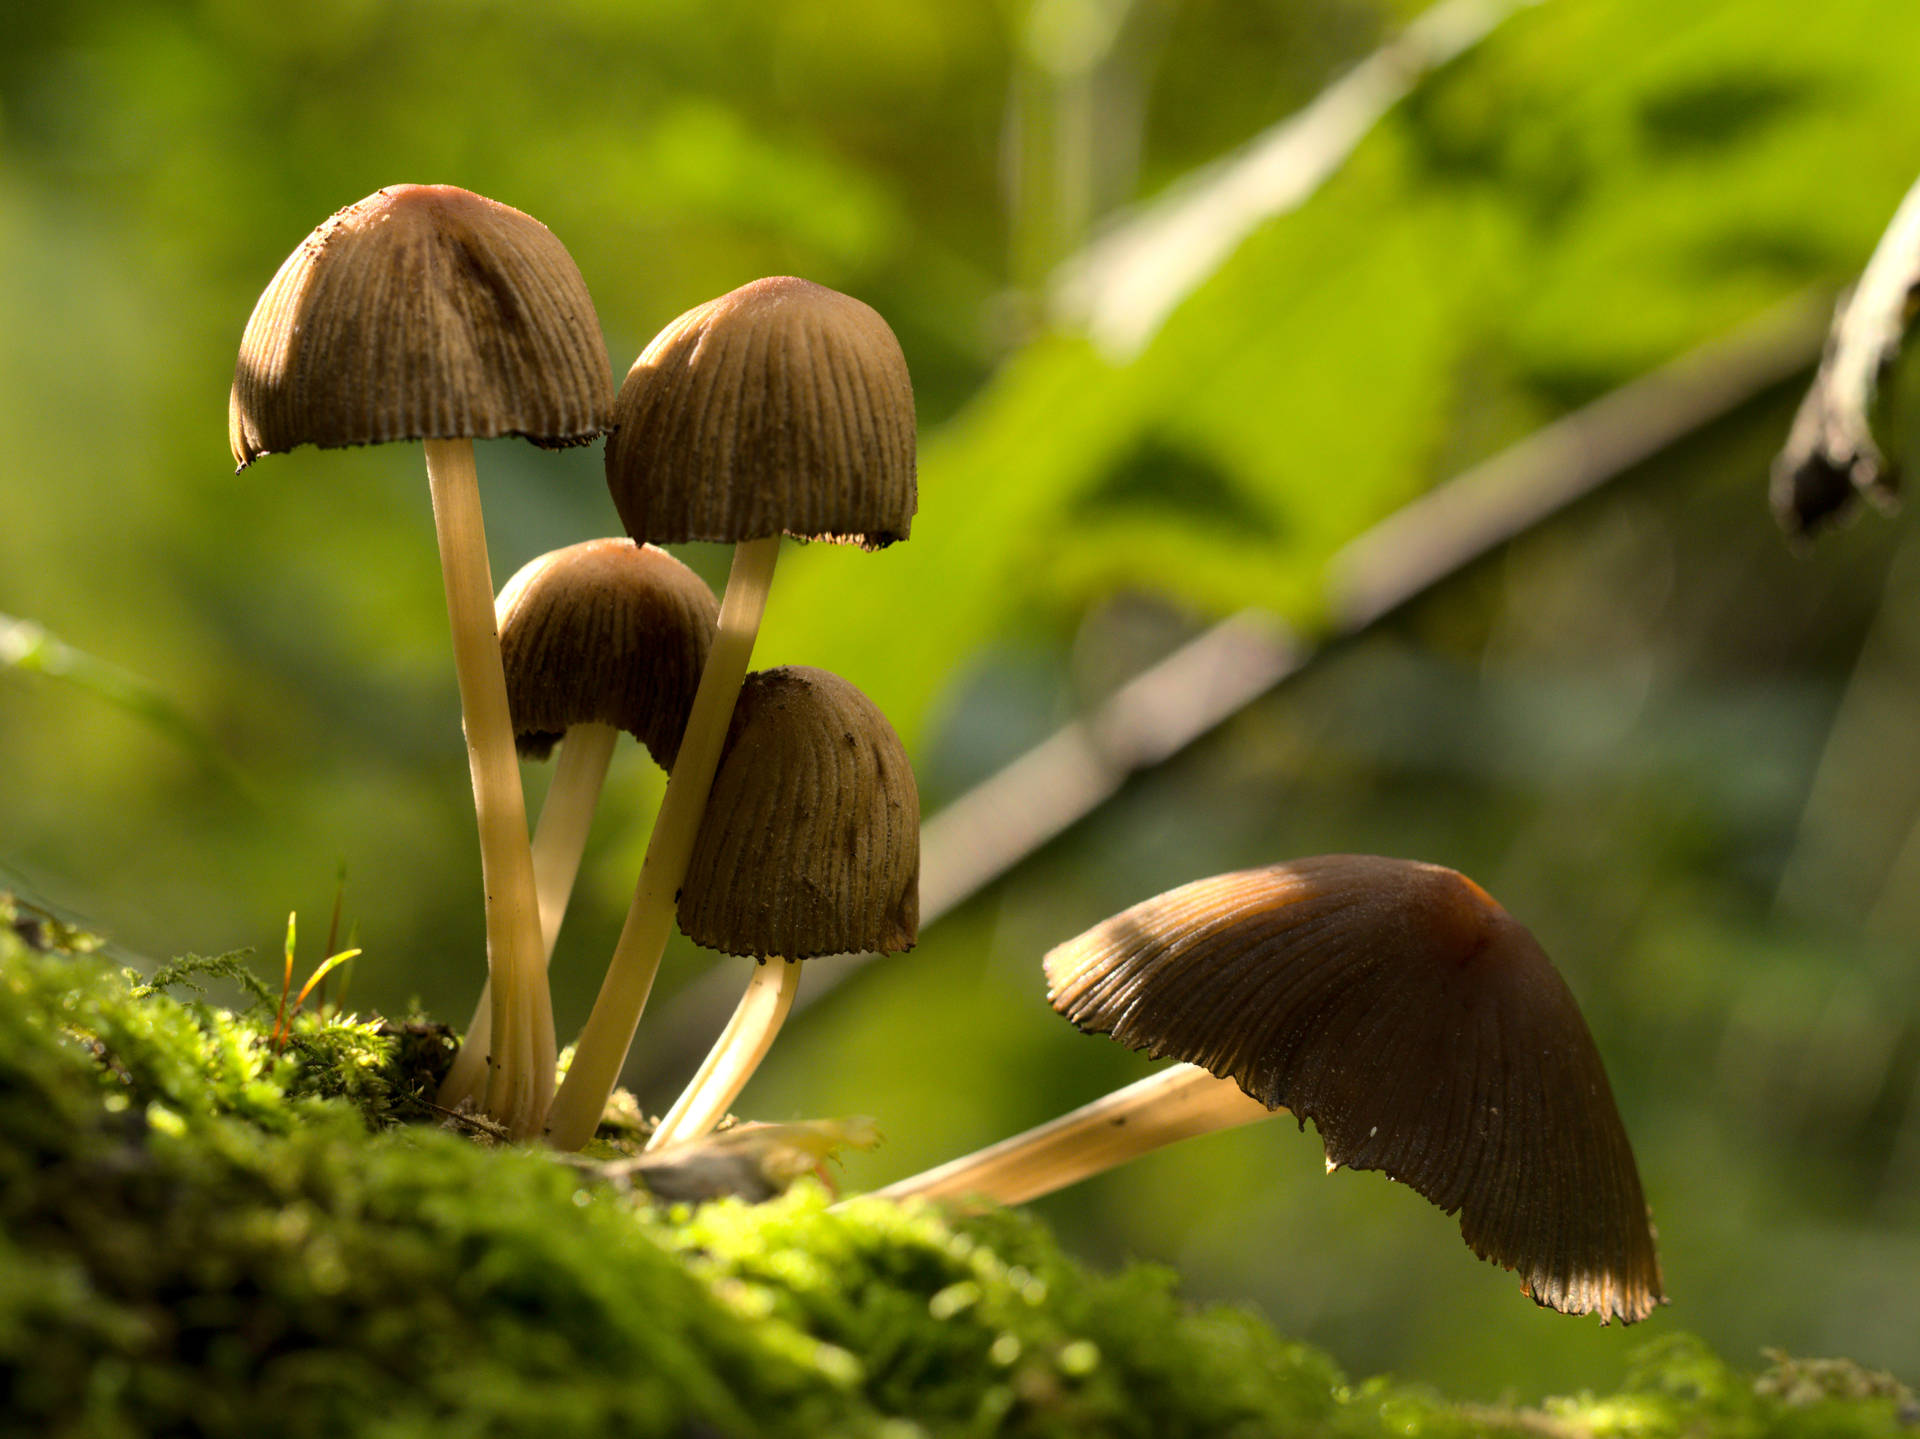 A Brown Umbrella Mushroom Growing Wild In A Forest